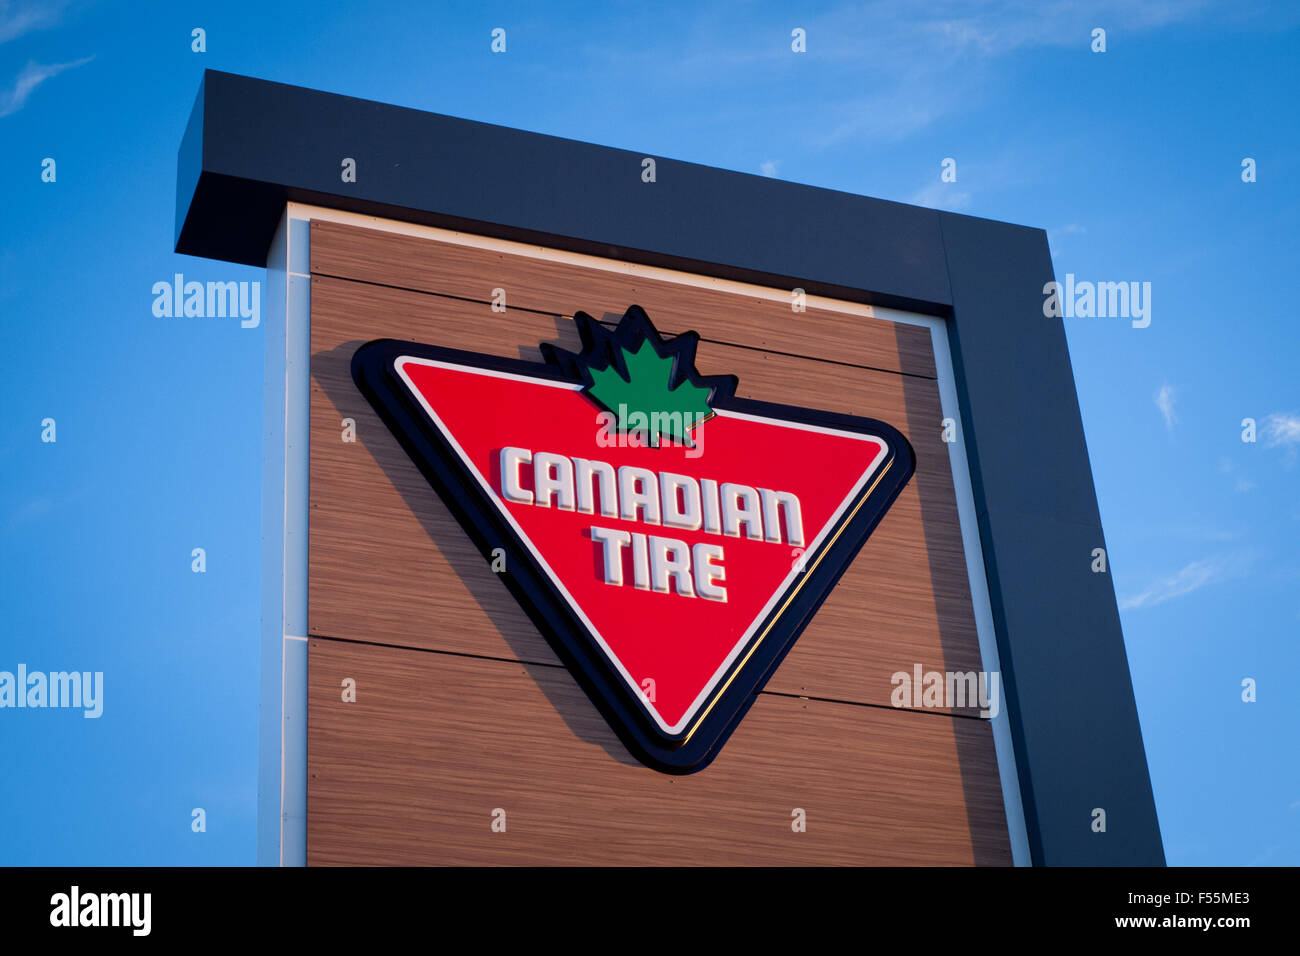 https://c8.alamy.com/comp/F55ME3/canadian-tire-logo-on-a-sign-at-south-edmonton-common-in-edmonton-F55ME3.jpg